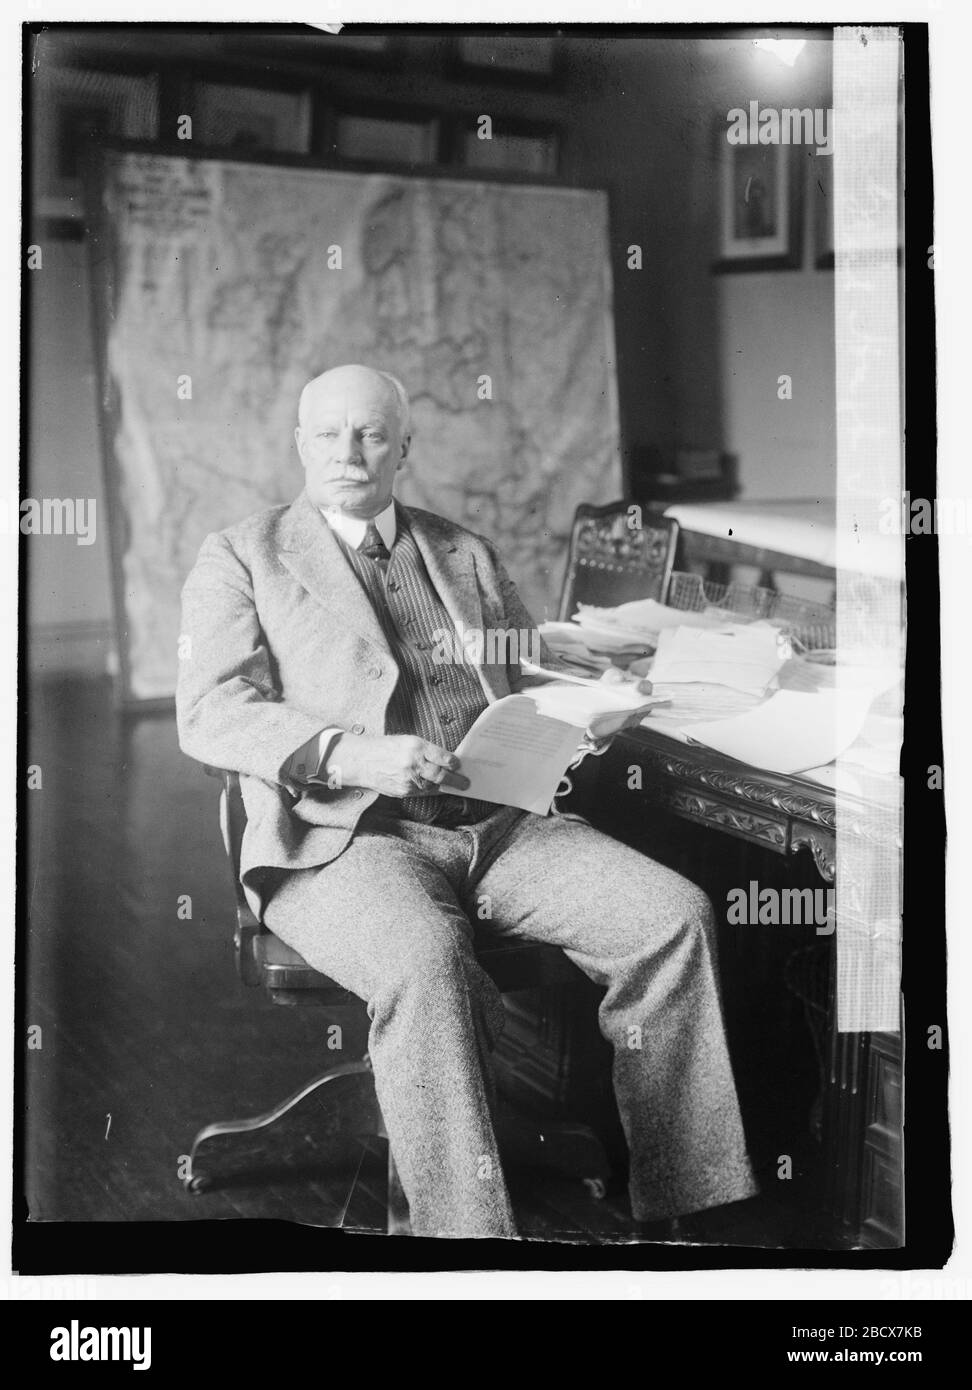 'English: Title: ...] Hugh J. [i.e., L.] Scott Abstract/medium: 1 negative : glass ; 4 x 5 in. or smaller; between 1918 and 1920 date QS:P,+1950-00-00T00:00:00Z/7,P1319,+1918-00-00T00:00:00Z/9,P1326,+1920-00-00T00:00:00Z/9; Library of Congress  Catalog: http://lccn.loc.gov/2016819522 Image download: http://cdn.loc.gov/service/pnp/npcc/00200/00234v.jpg Original url: https://www.loc.gov/pictures/item/2016819522/; National Photo Company Collection; ' Stock Photo